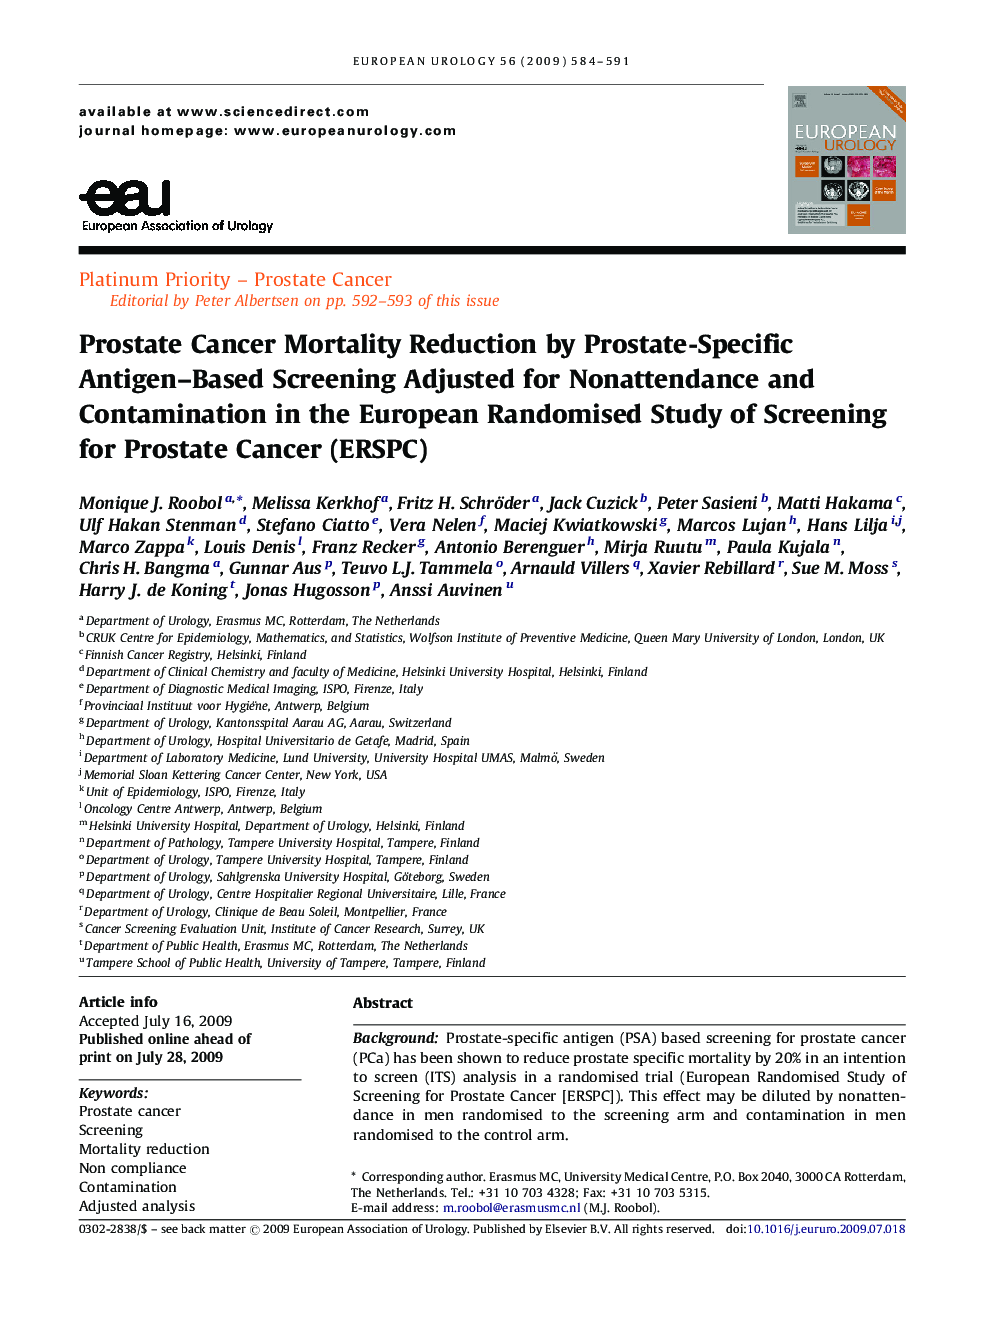 Prostate Cancer Mortality Reduction by Prostate-Specific Antigen–Based Screening Adjusted for Nonattendance and Contamination in the European Randomised Study of Screening for Prostate Cancer (ERSPC) 